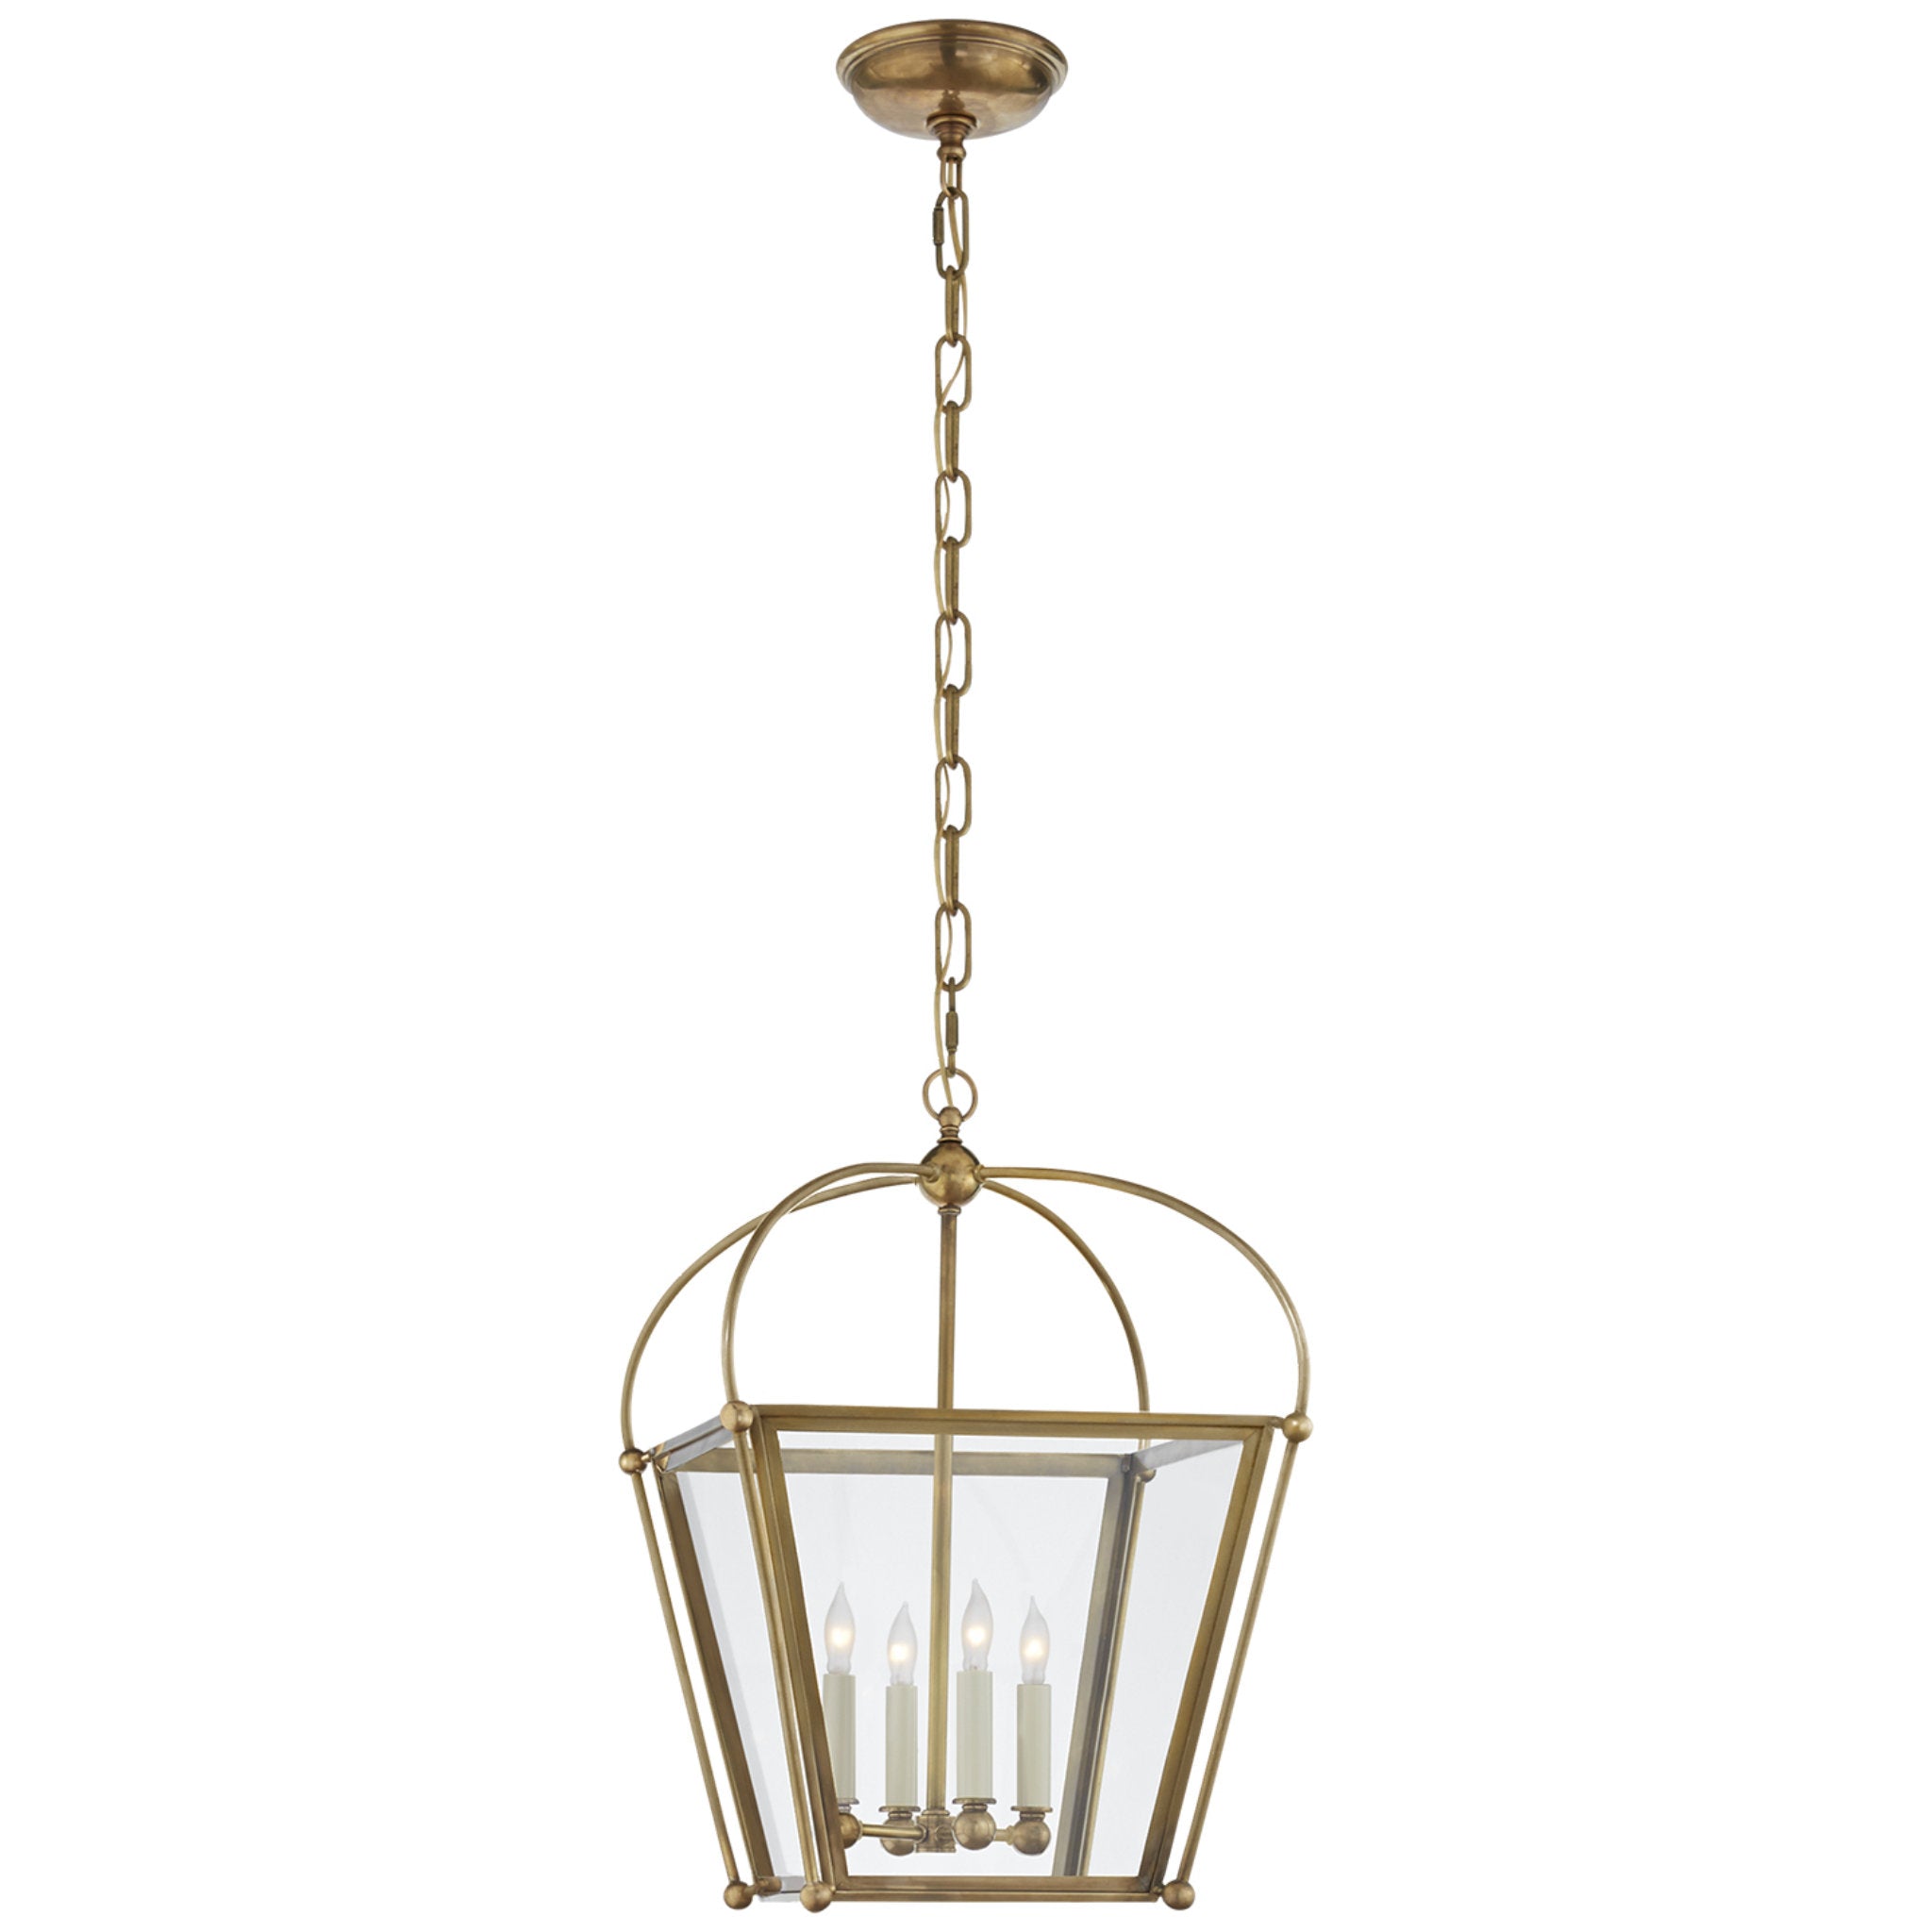 Chapman & Myers Riverside Small Square Lantern in Antique-Burnished Brass with Clear Glass